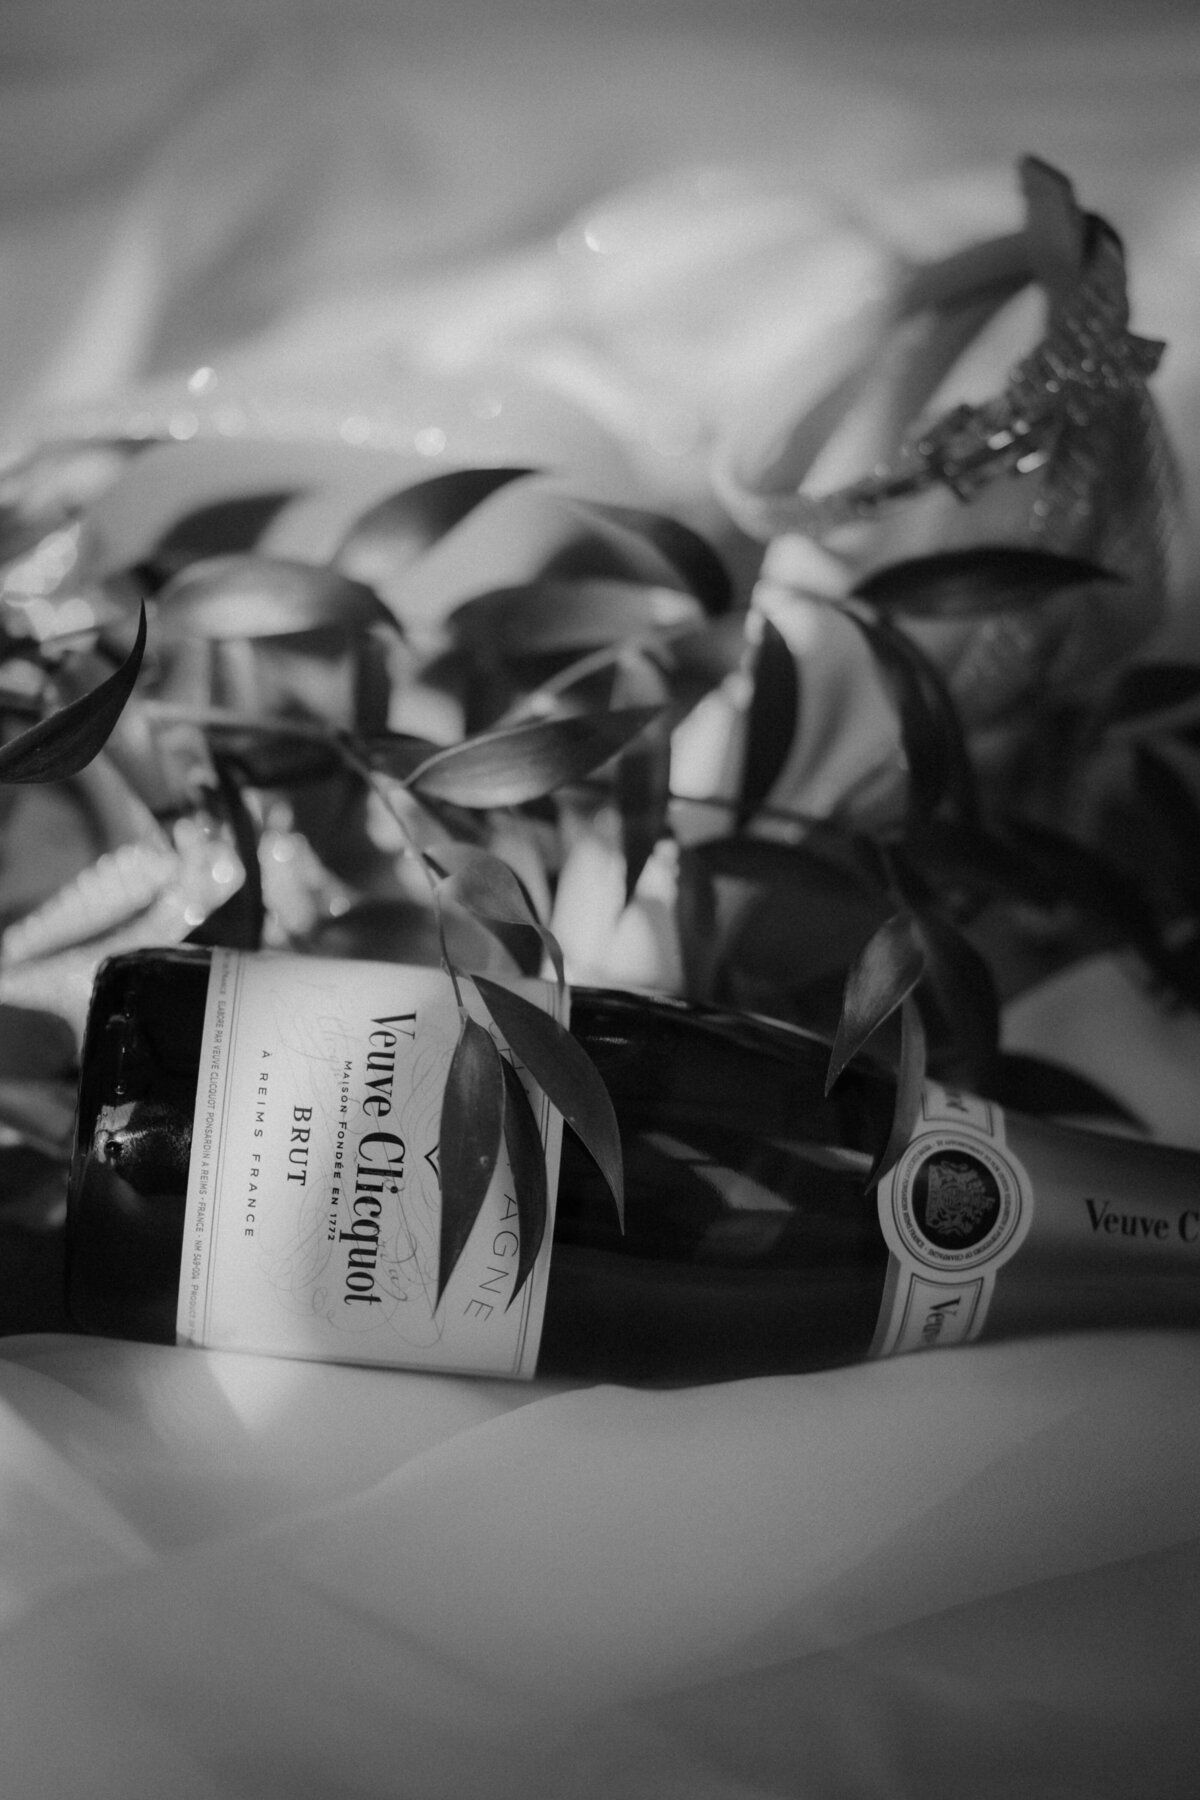 Classic elegance: Black and white image of a Veuve Clicquot champagne bottle.